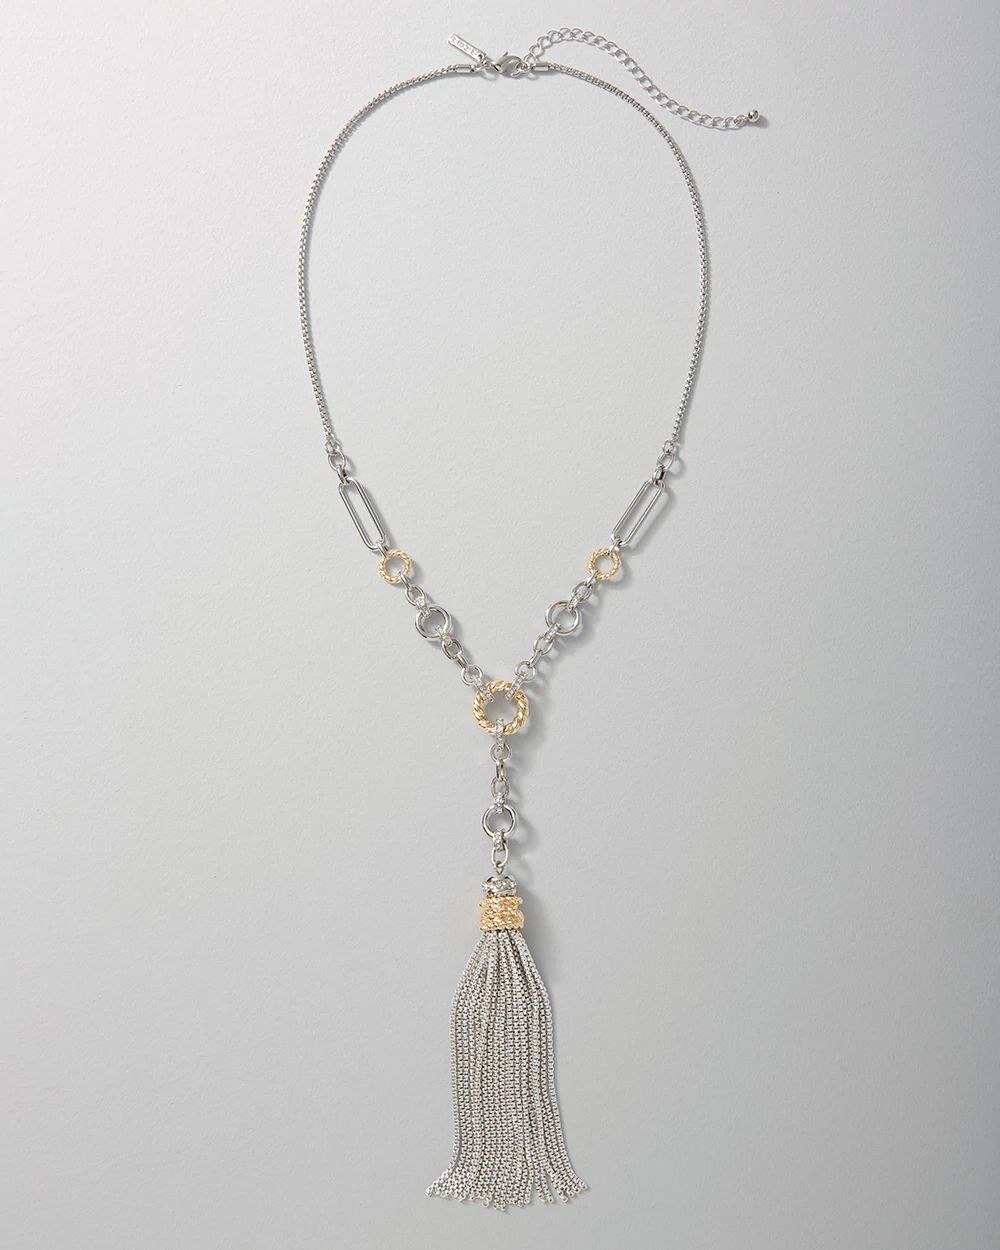 Mixed-Metal Tassel Necklace click to view larger image.